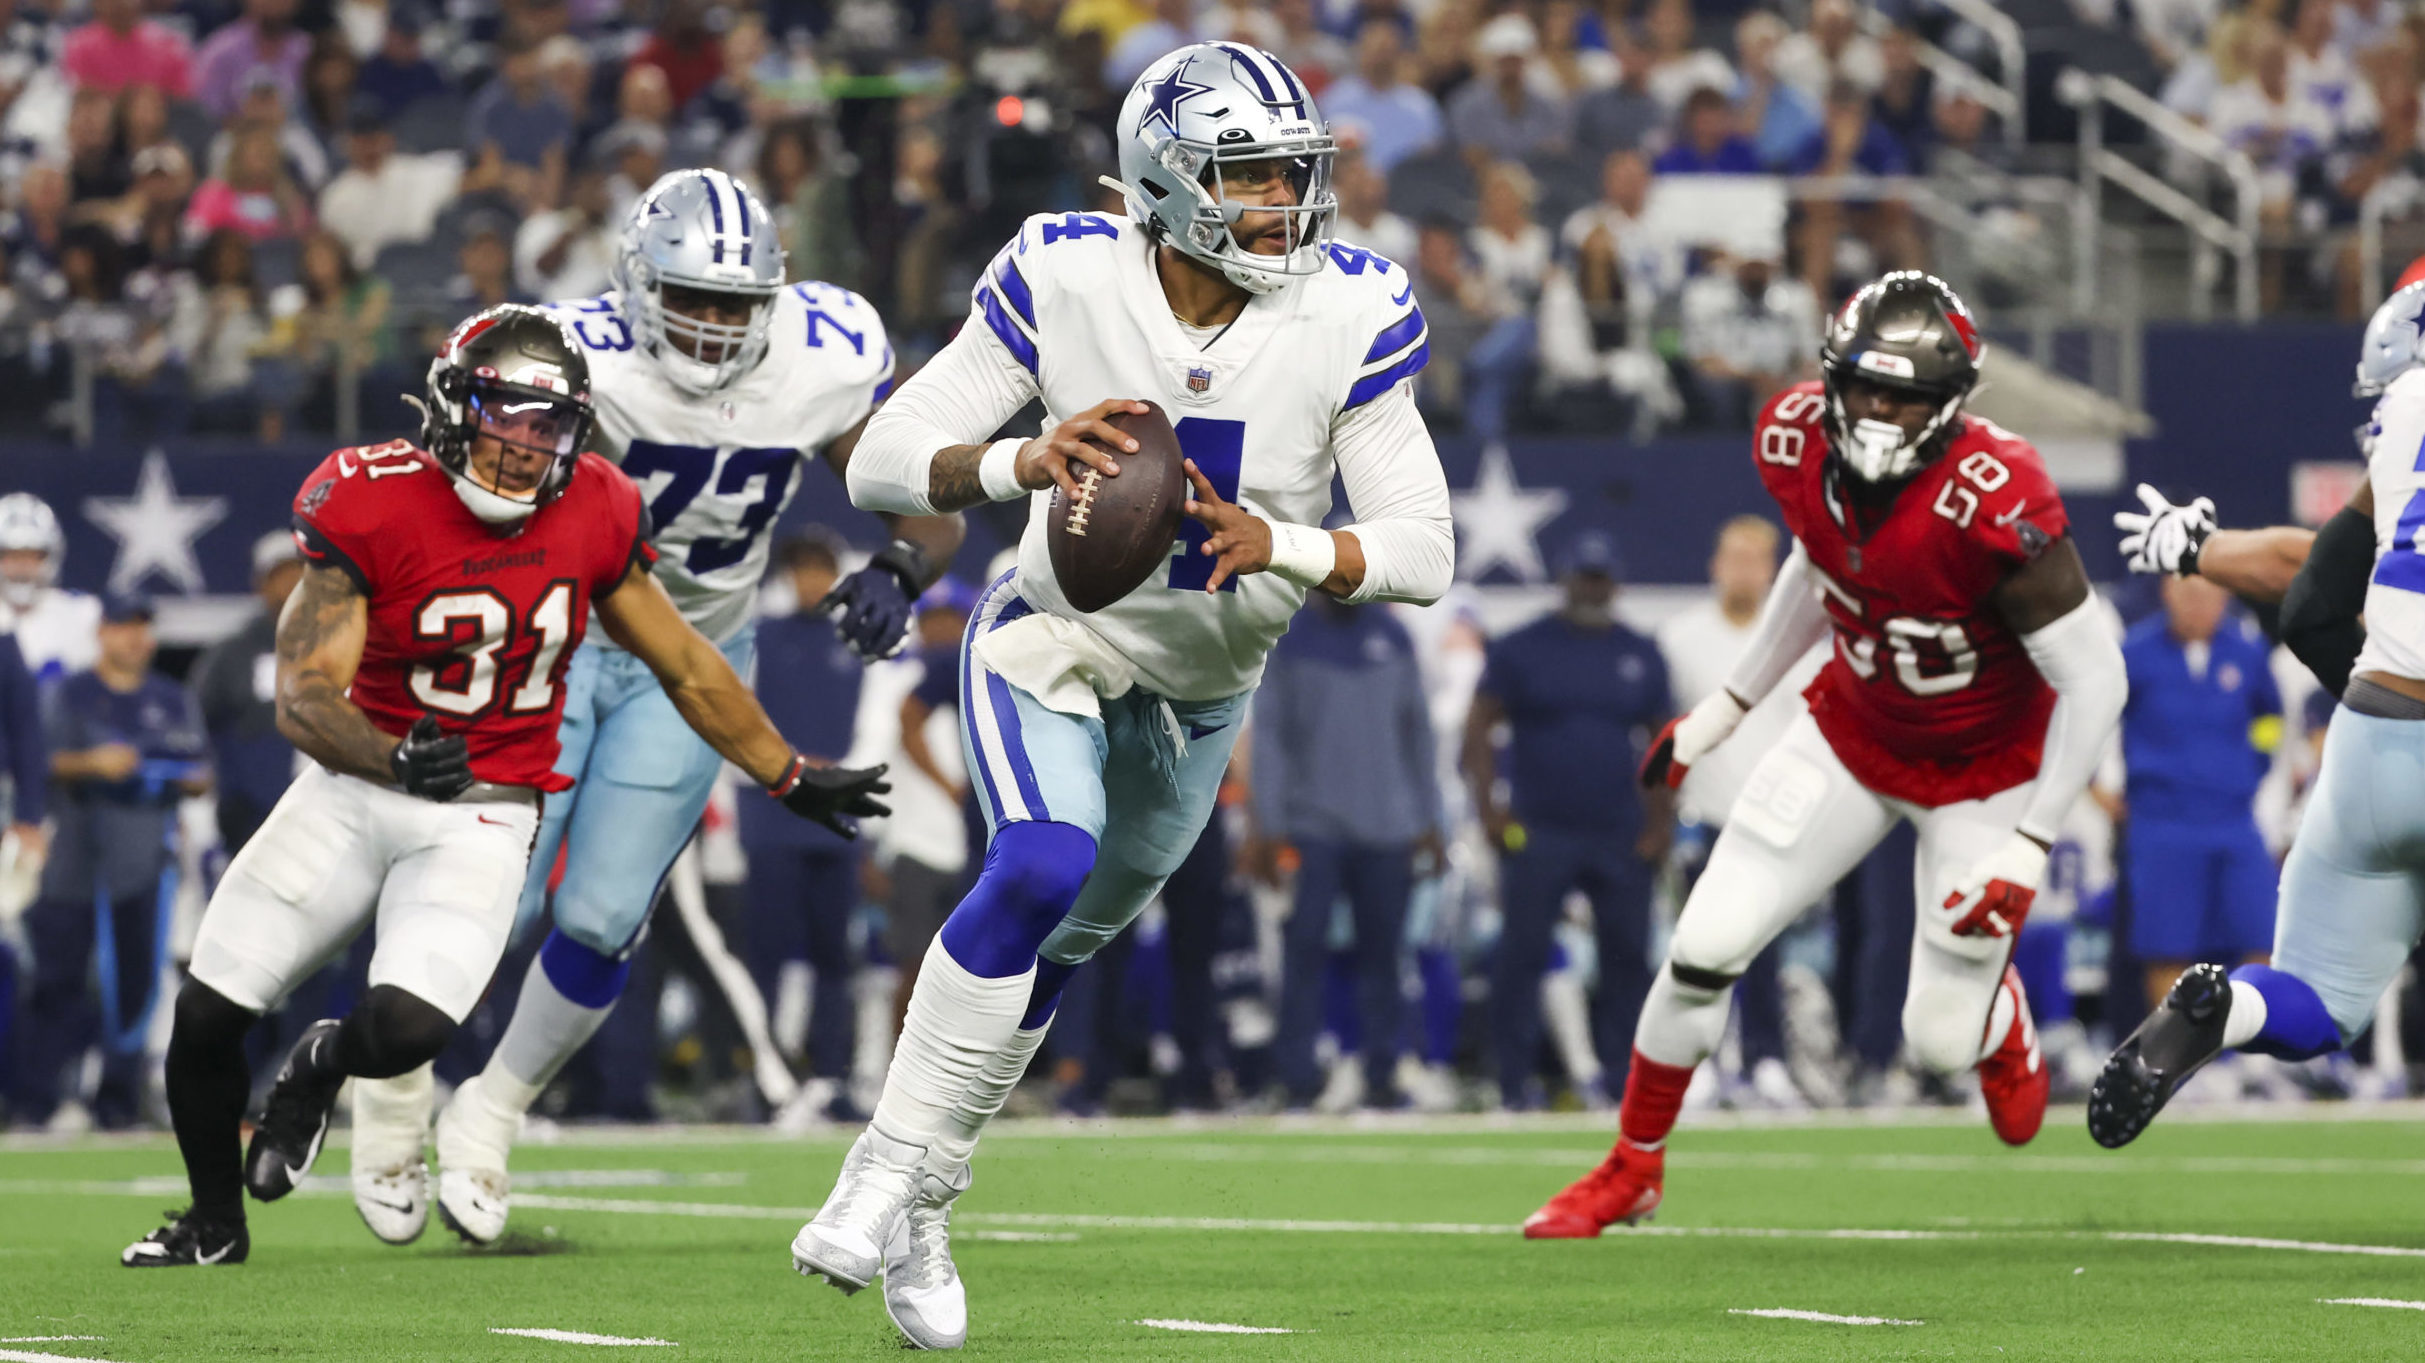 Now You Know: Dak Prescott Will Need to Be Escape Artist to Beat 49ers